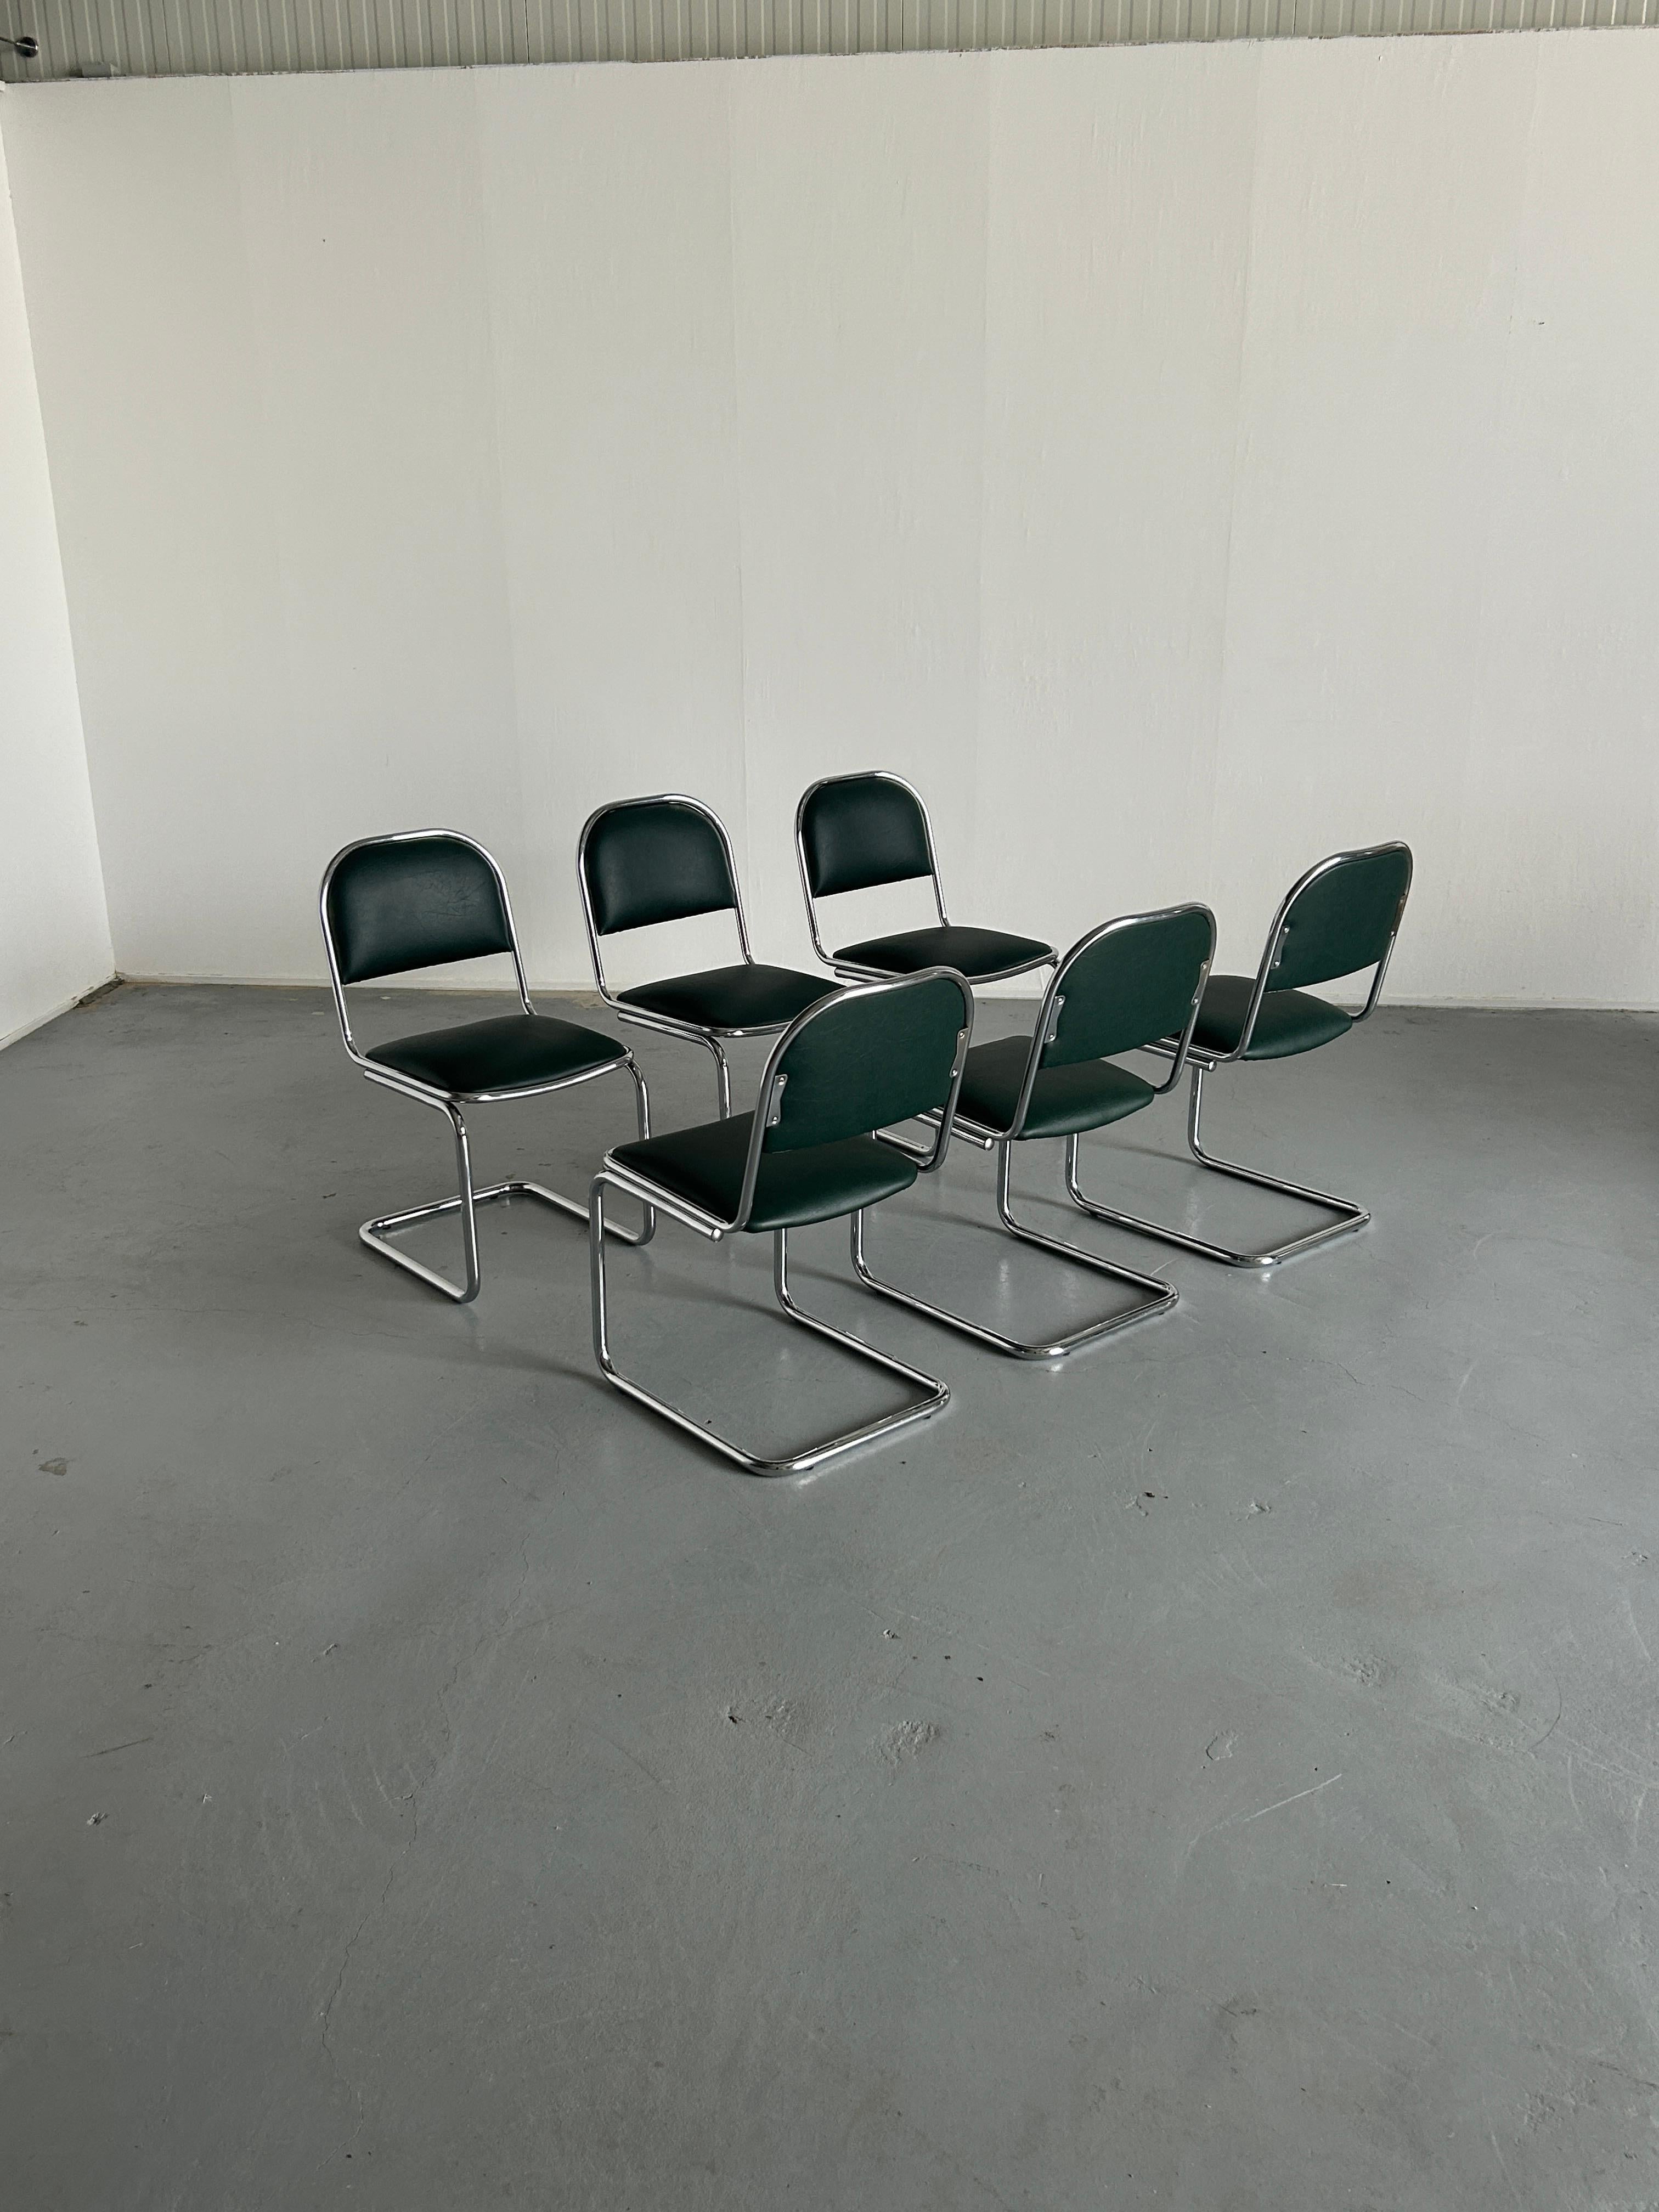  1 of 6 Bauhaus Design Chrome Tubular Steel and Green Faux Leather Chairs, 1980s In Good Condition For Sale In Zagreb, HR